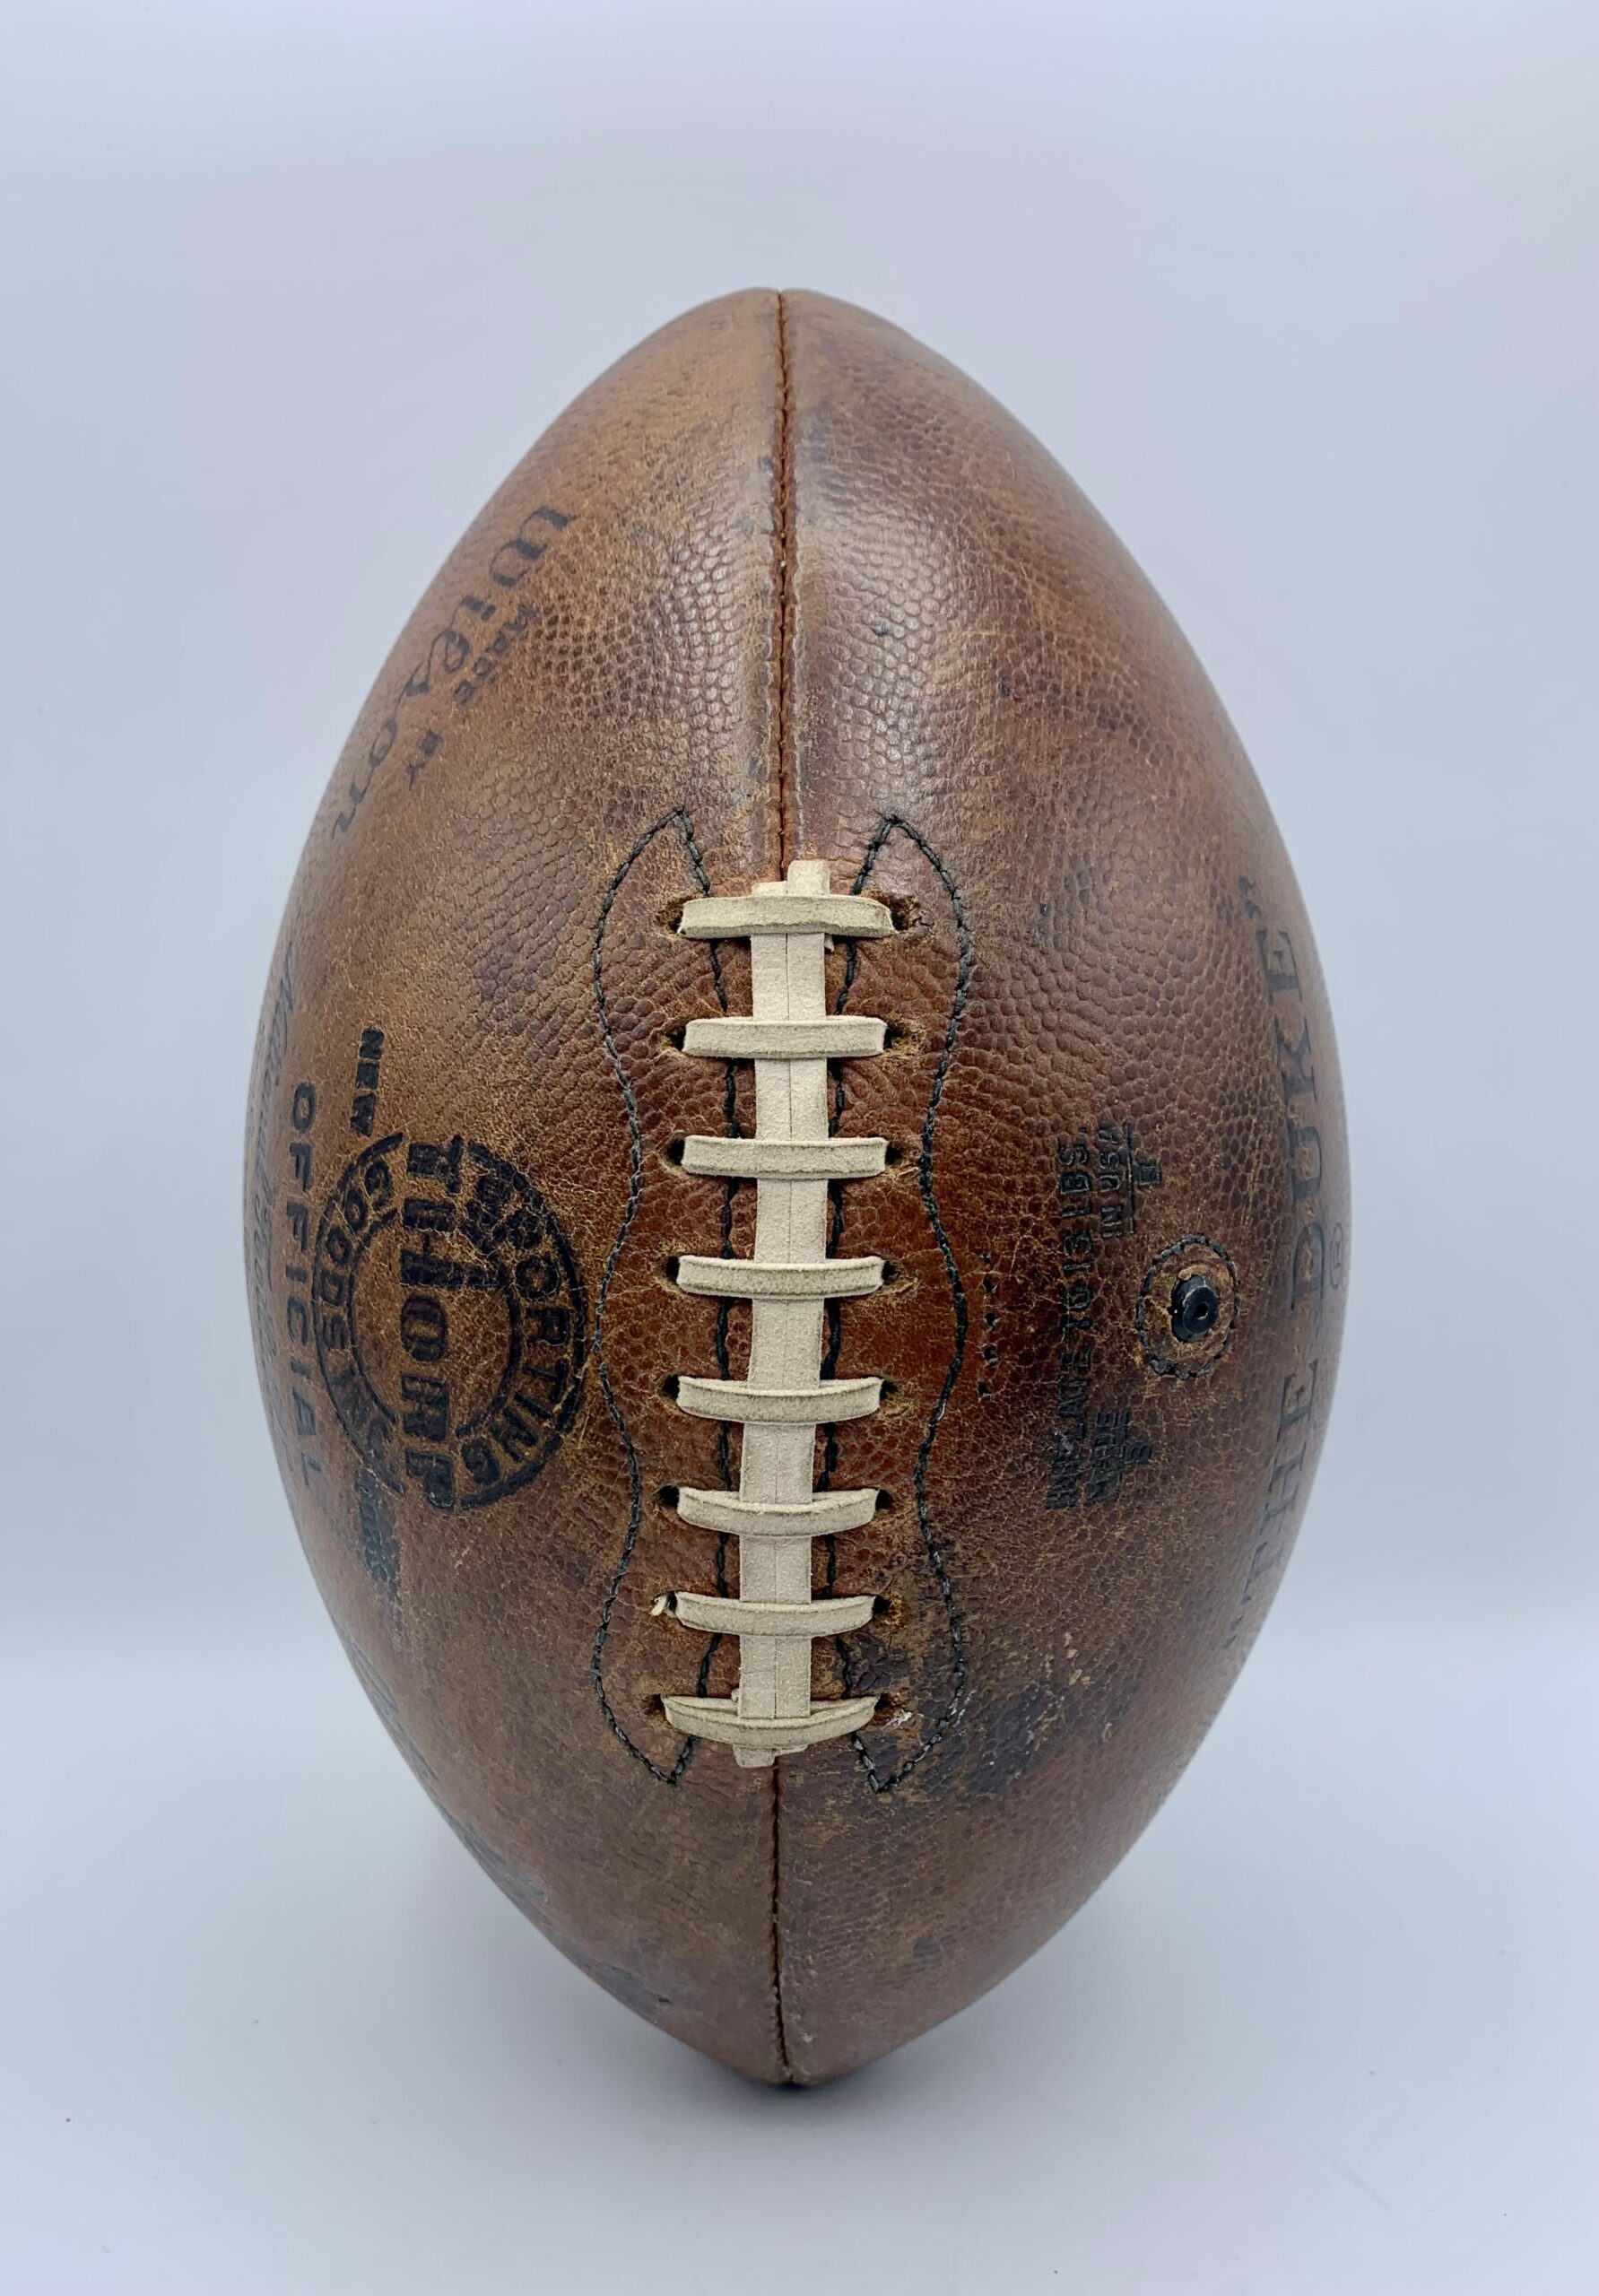 Thorp Sporting Goods – NFL Football – Rozelle-Comm- Game Ball – Date Code  “BB”-1969 - Finding Nostalgia